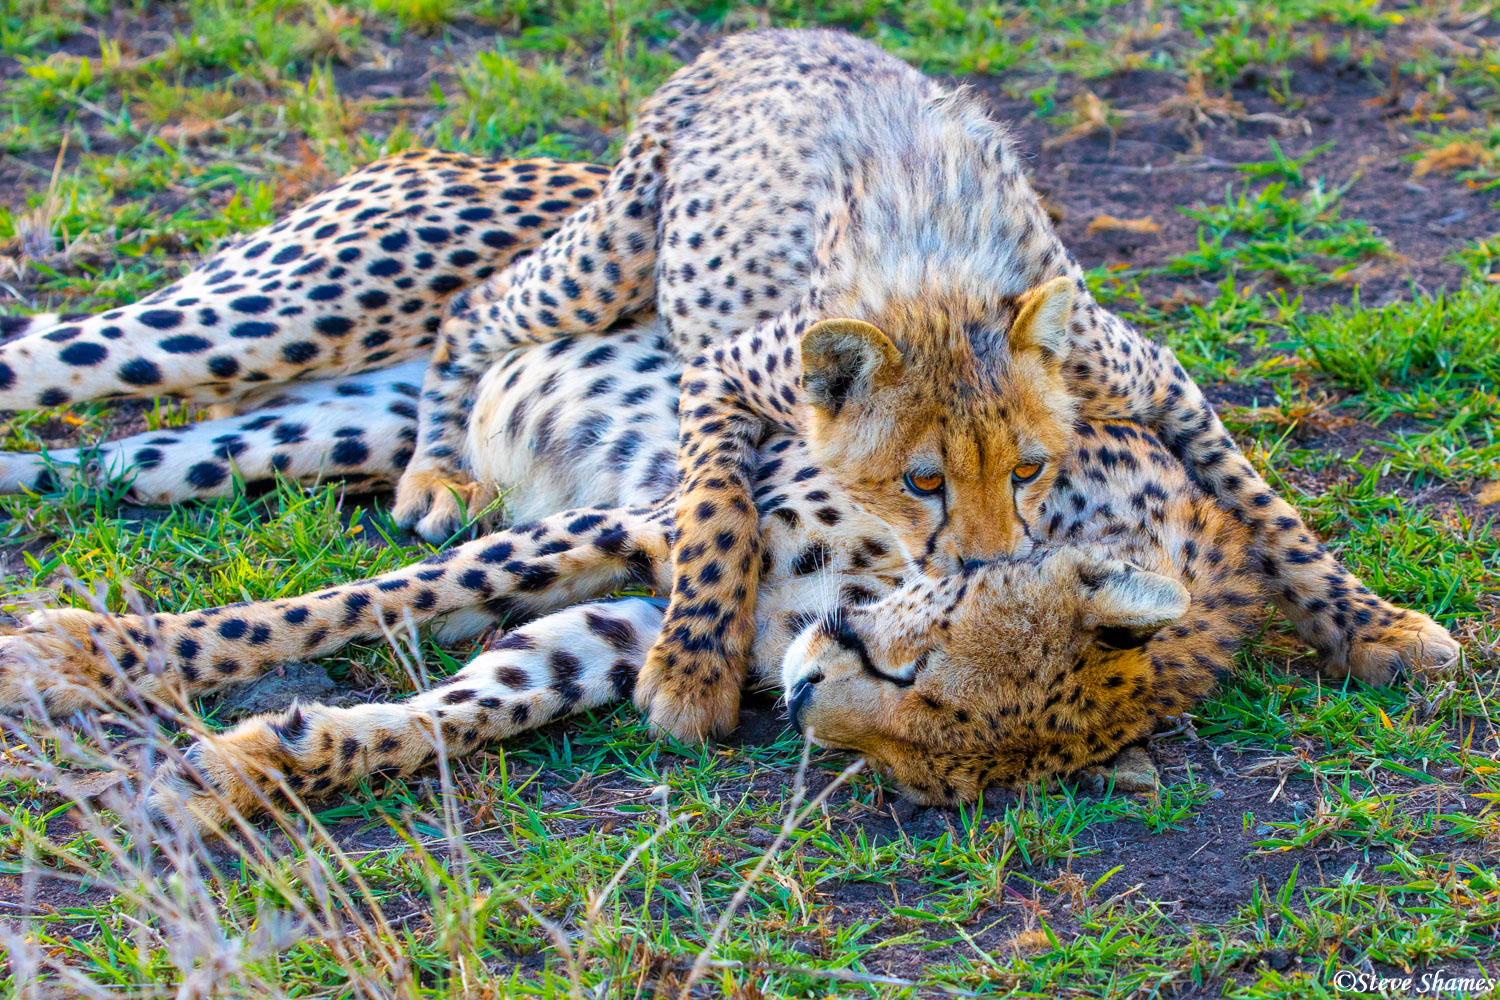 Mother and cub cheetahs playing around.